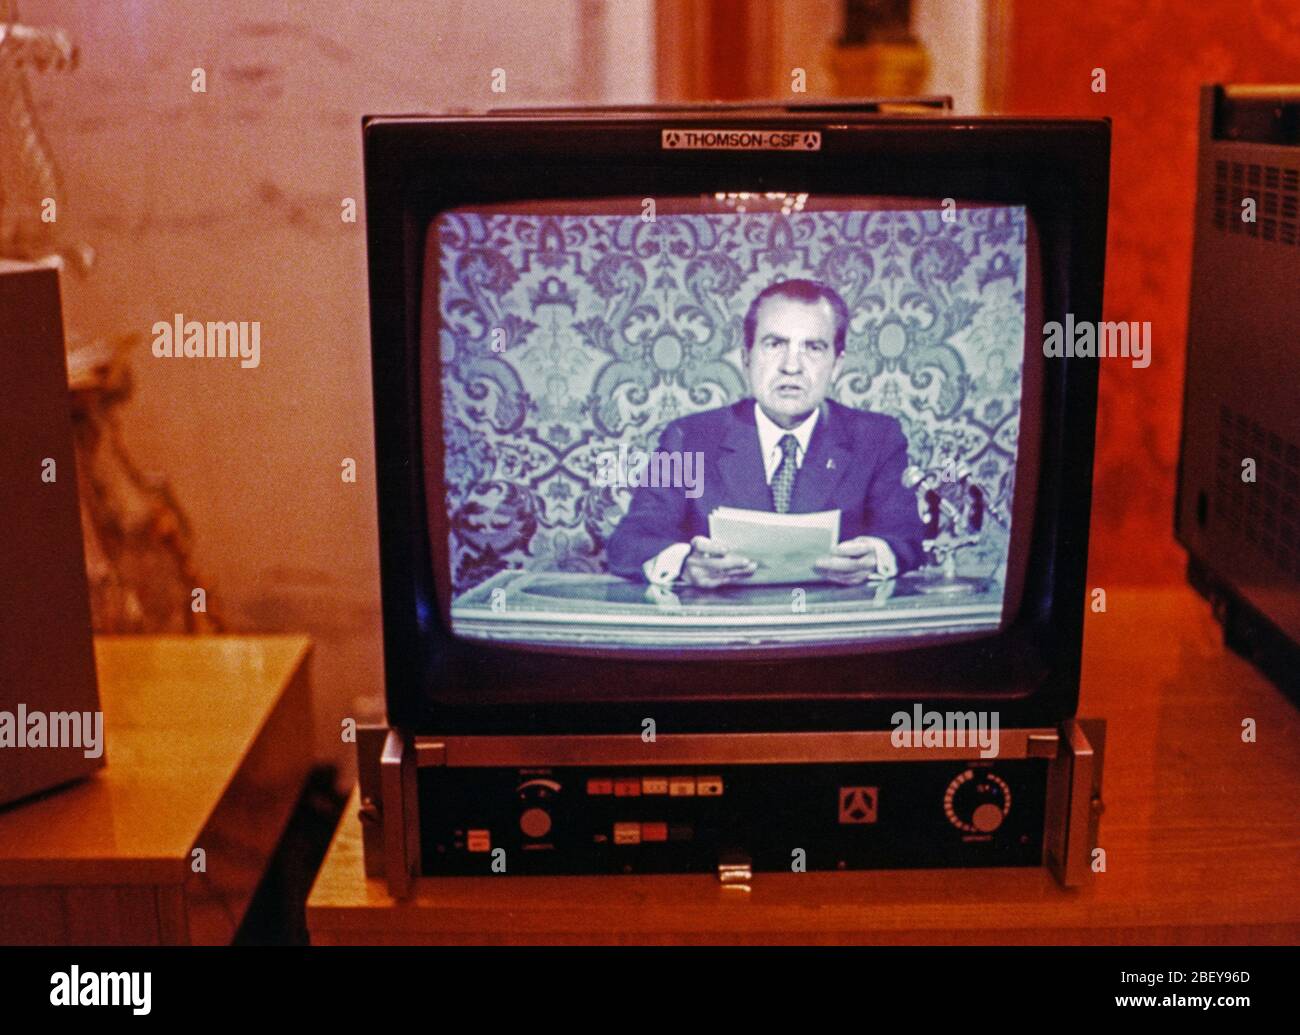 President Nixon addresses the people of the USSR and United States on a live television broadcast from the Green Room in the Grand Kremlin Palace on May 28, 1972, between 8:30 PM and 8:54 PM. Stock Photo